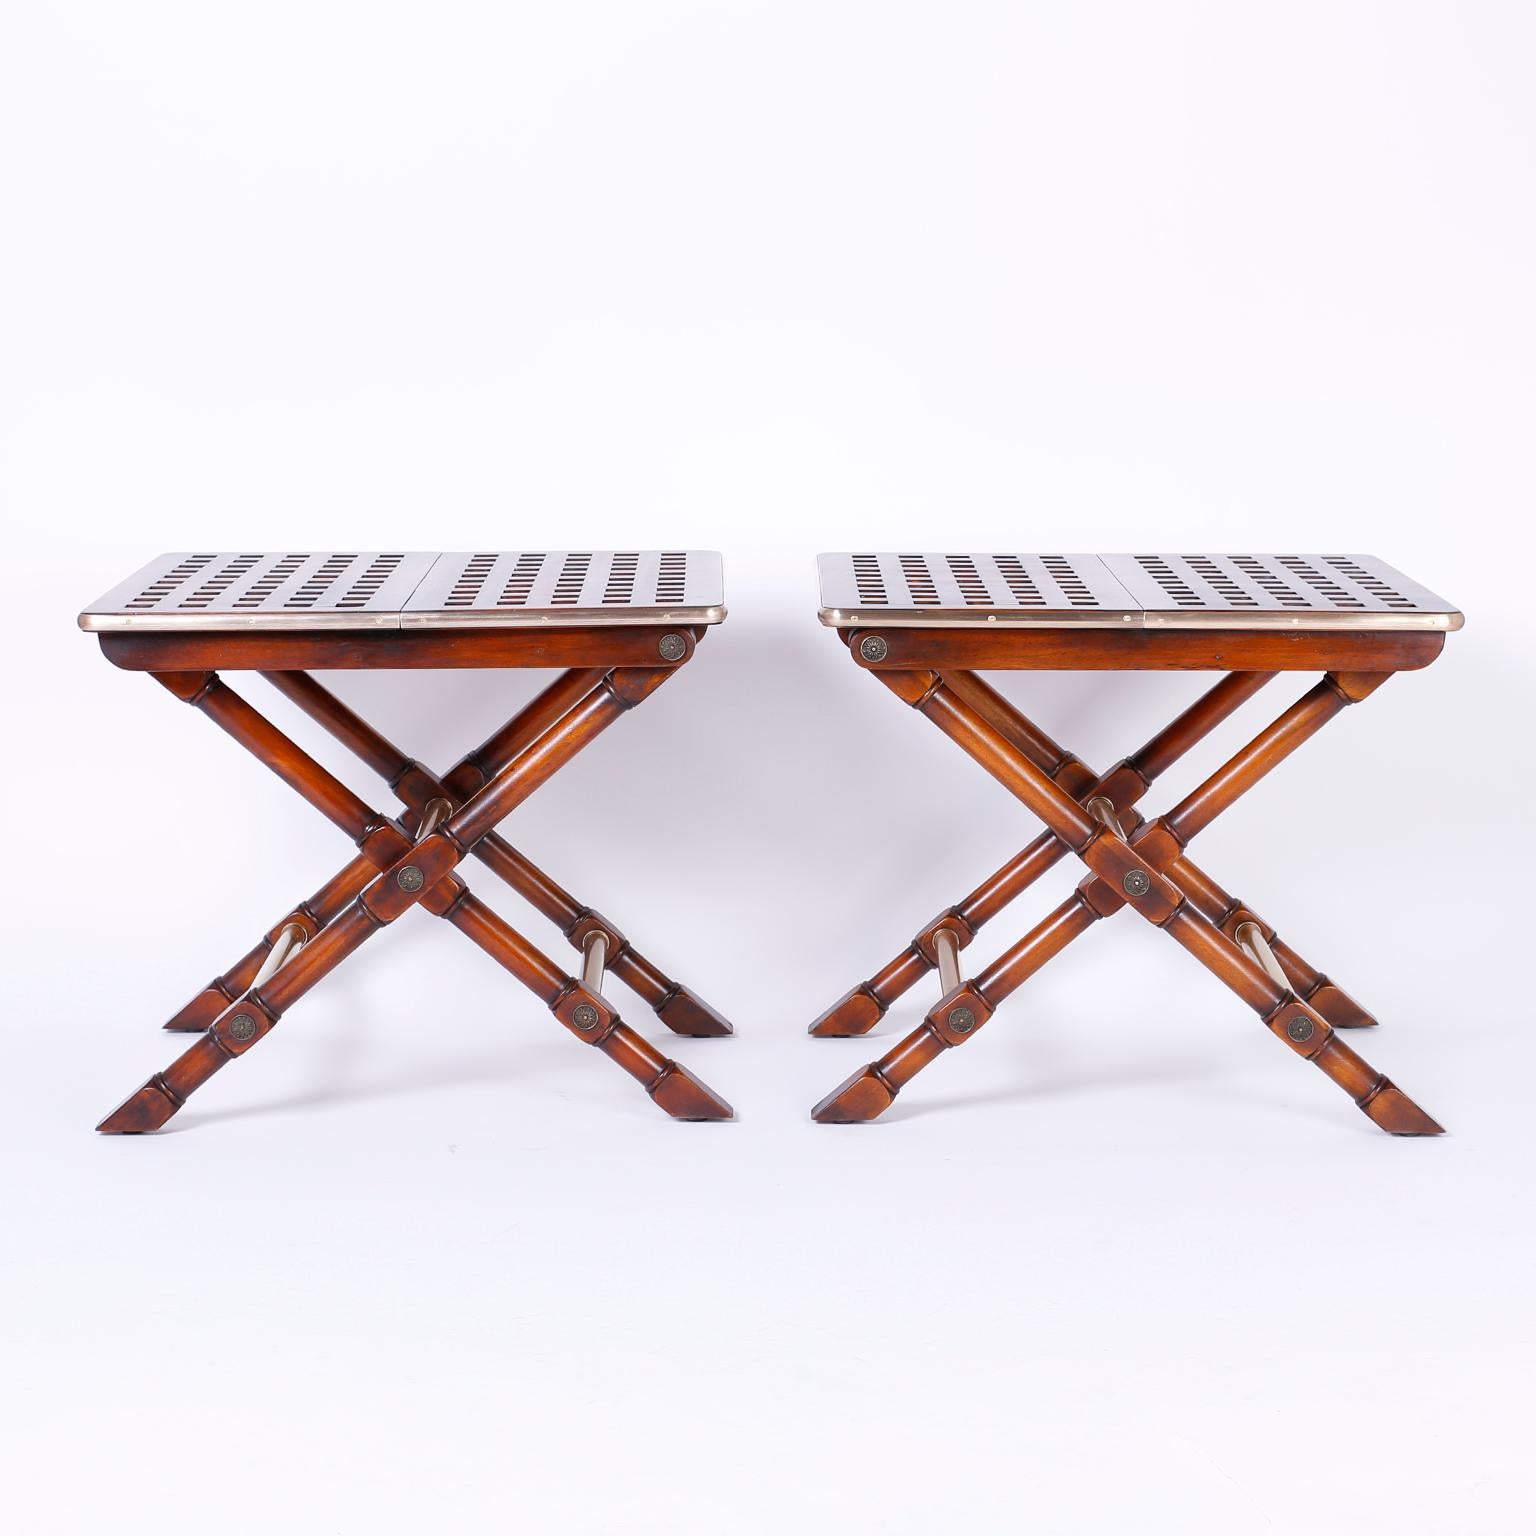 Unusual and fine pair of mahogany tables featuring criss cross construction on top banded with thick brass, X style turned legs and tubular brass stretchers. All the brass has been hand polished and lacquered for easy care, these tables conveniently